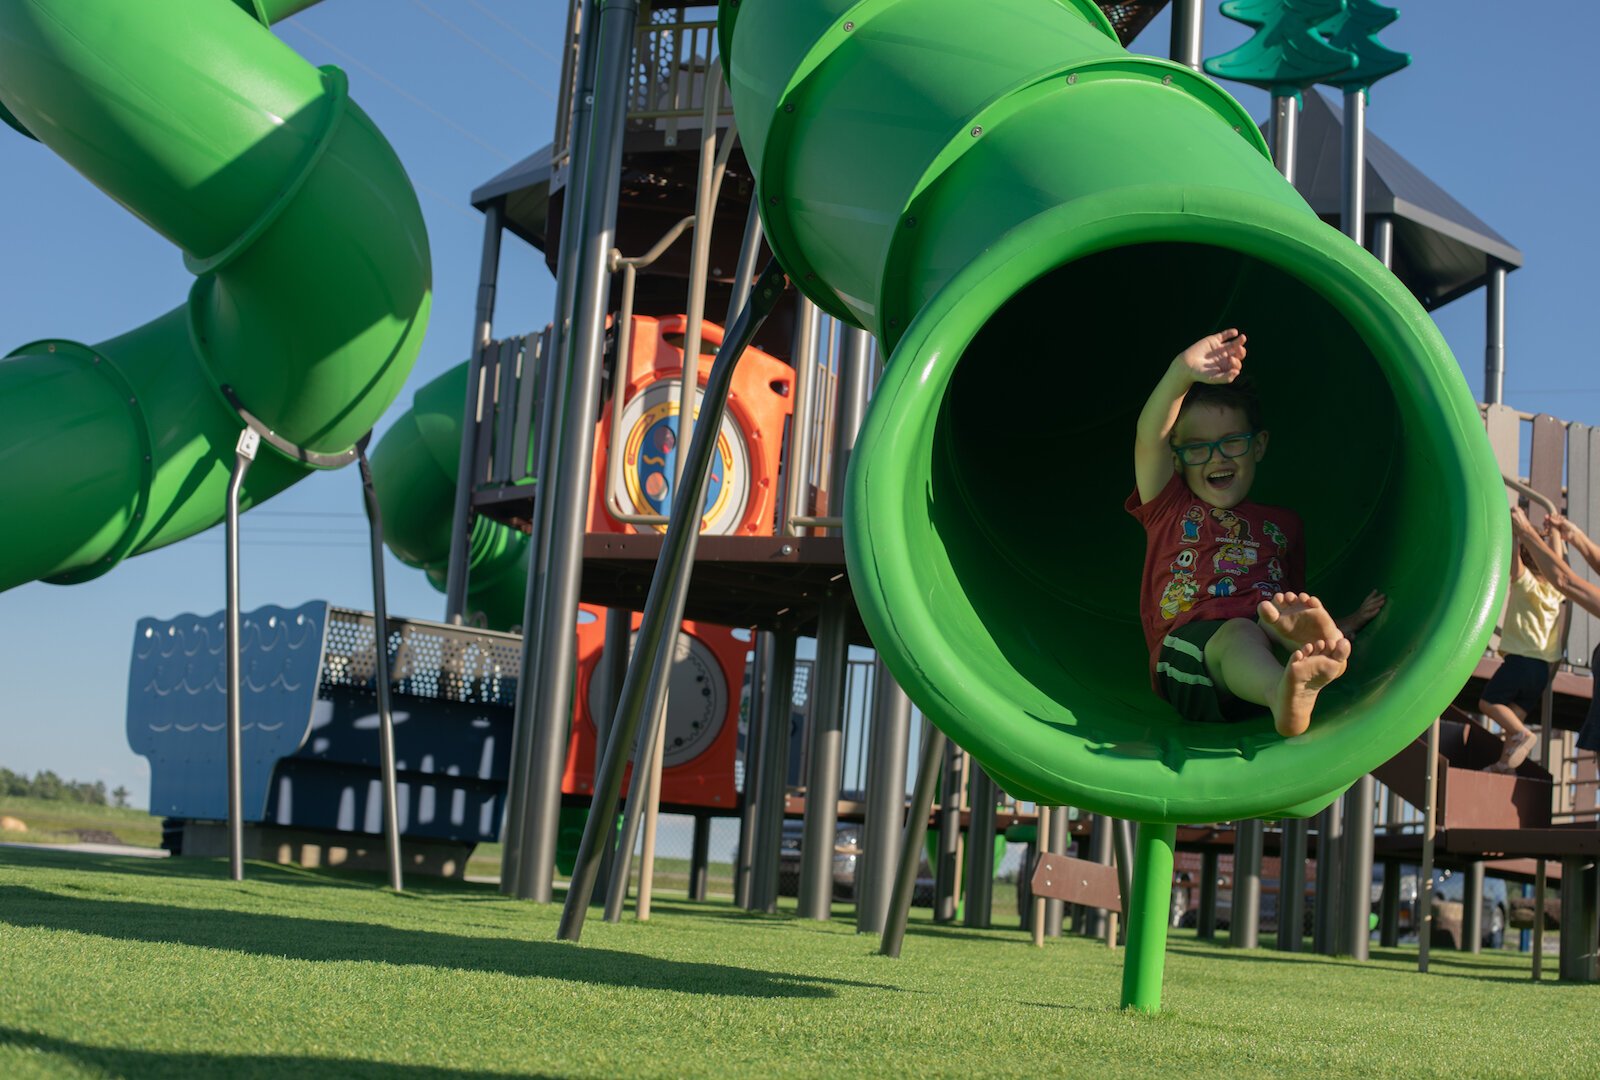 Drake Goetz Memorial Park has giant slides, opportunities to climb, and a smaller playground to accommodate the toddlers in your life. 